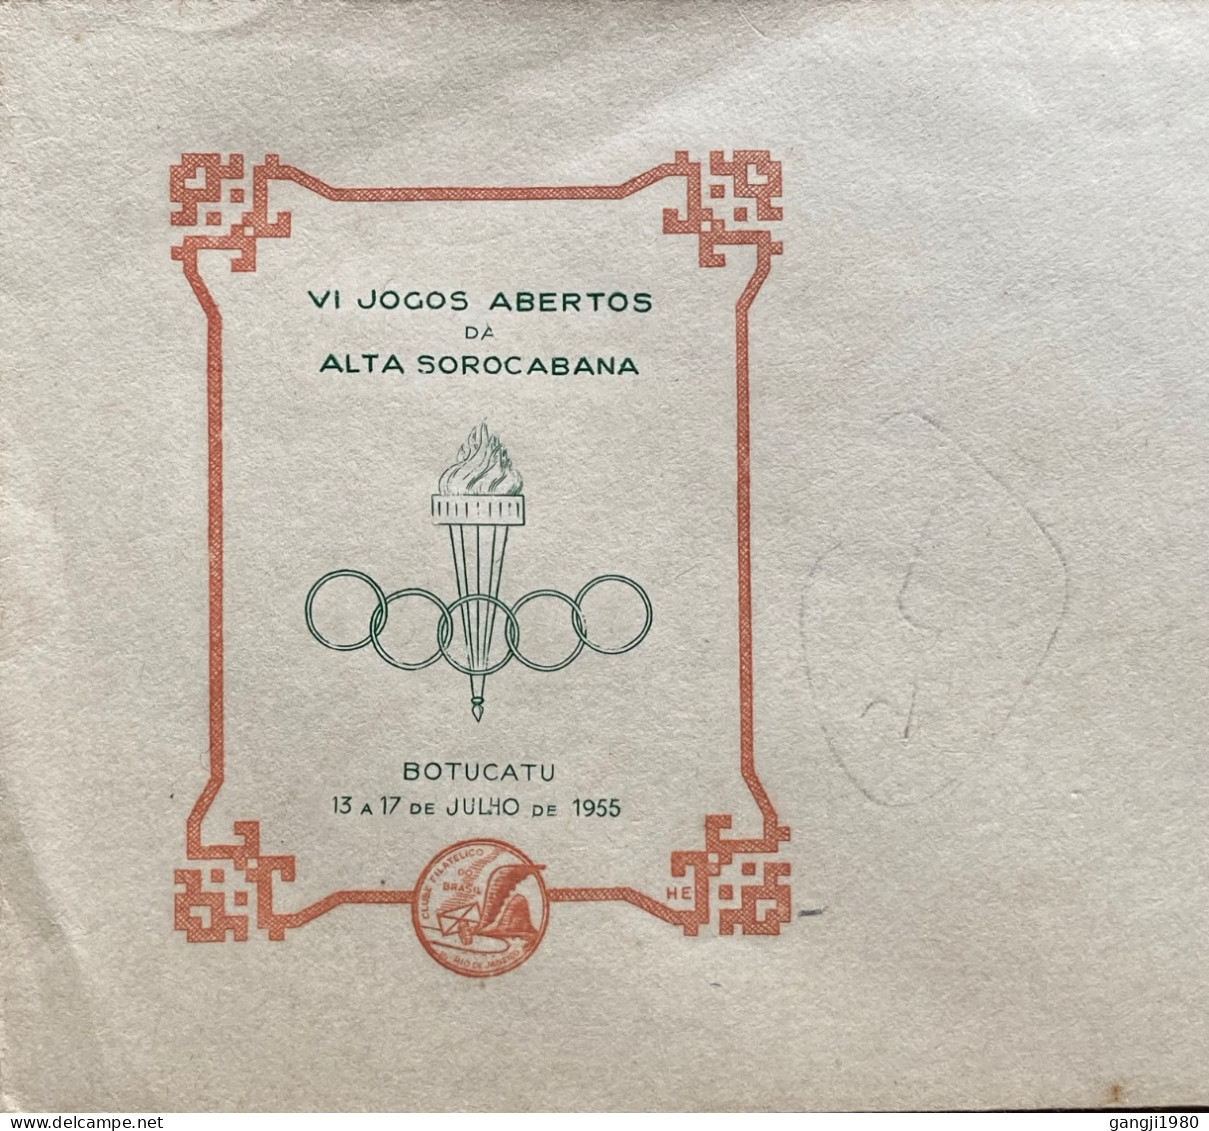 BRAZIL1955, FDC COVER OLYMPIC & TORCH, CHILDREN GAME, SPORT, ILLUSTRATE SPECIAL PICTURE, BOTUCATU CITY CANCEL, VI JAGOS - Covers & Documents